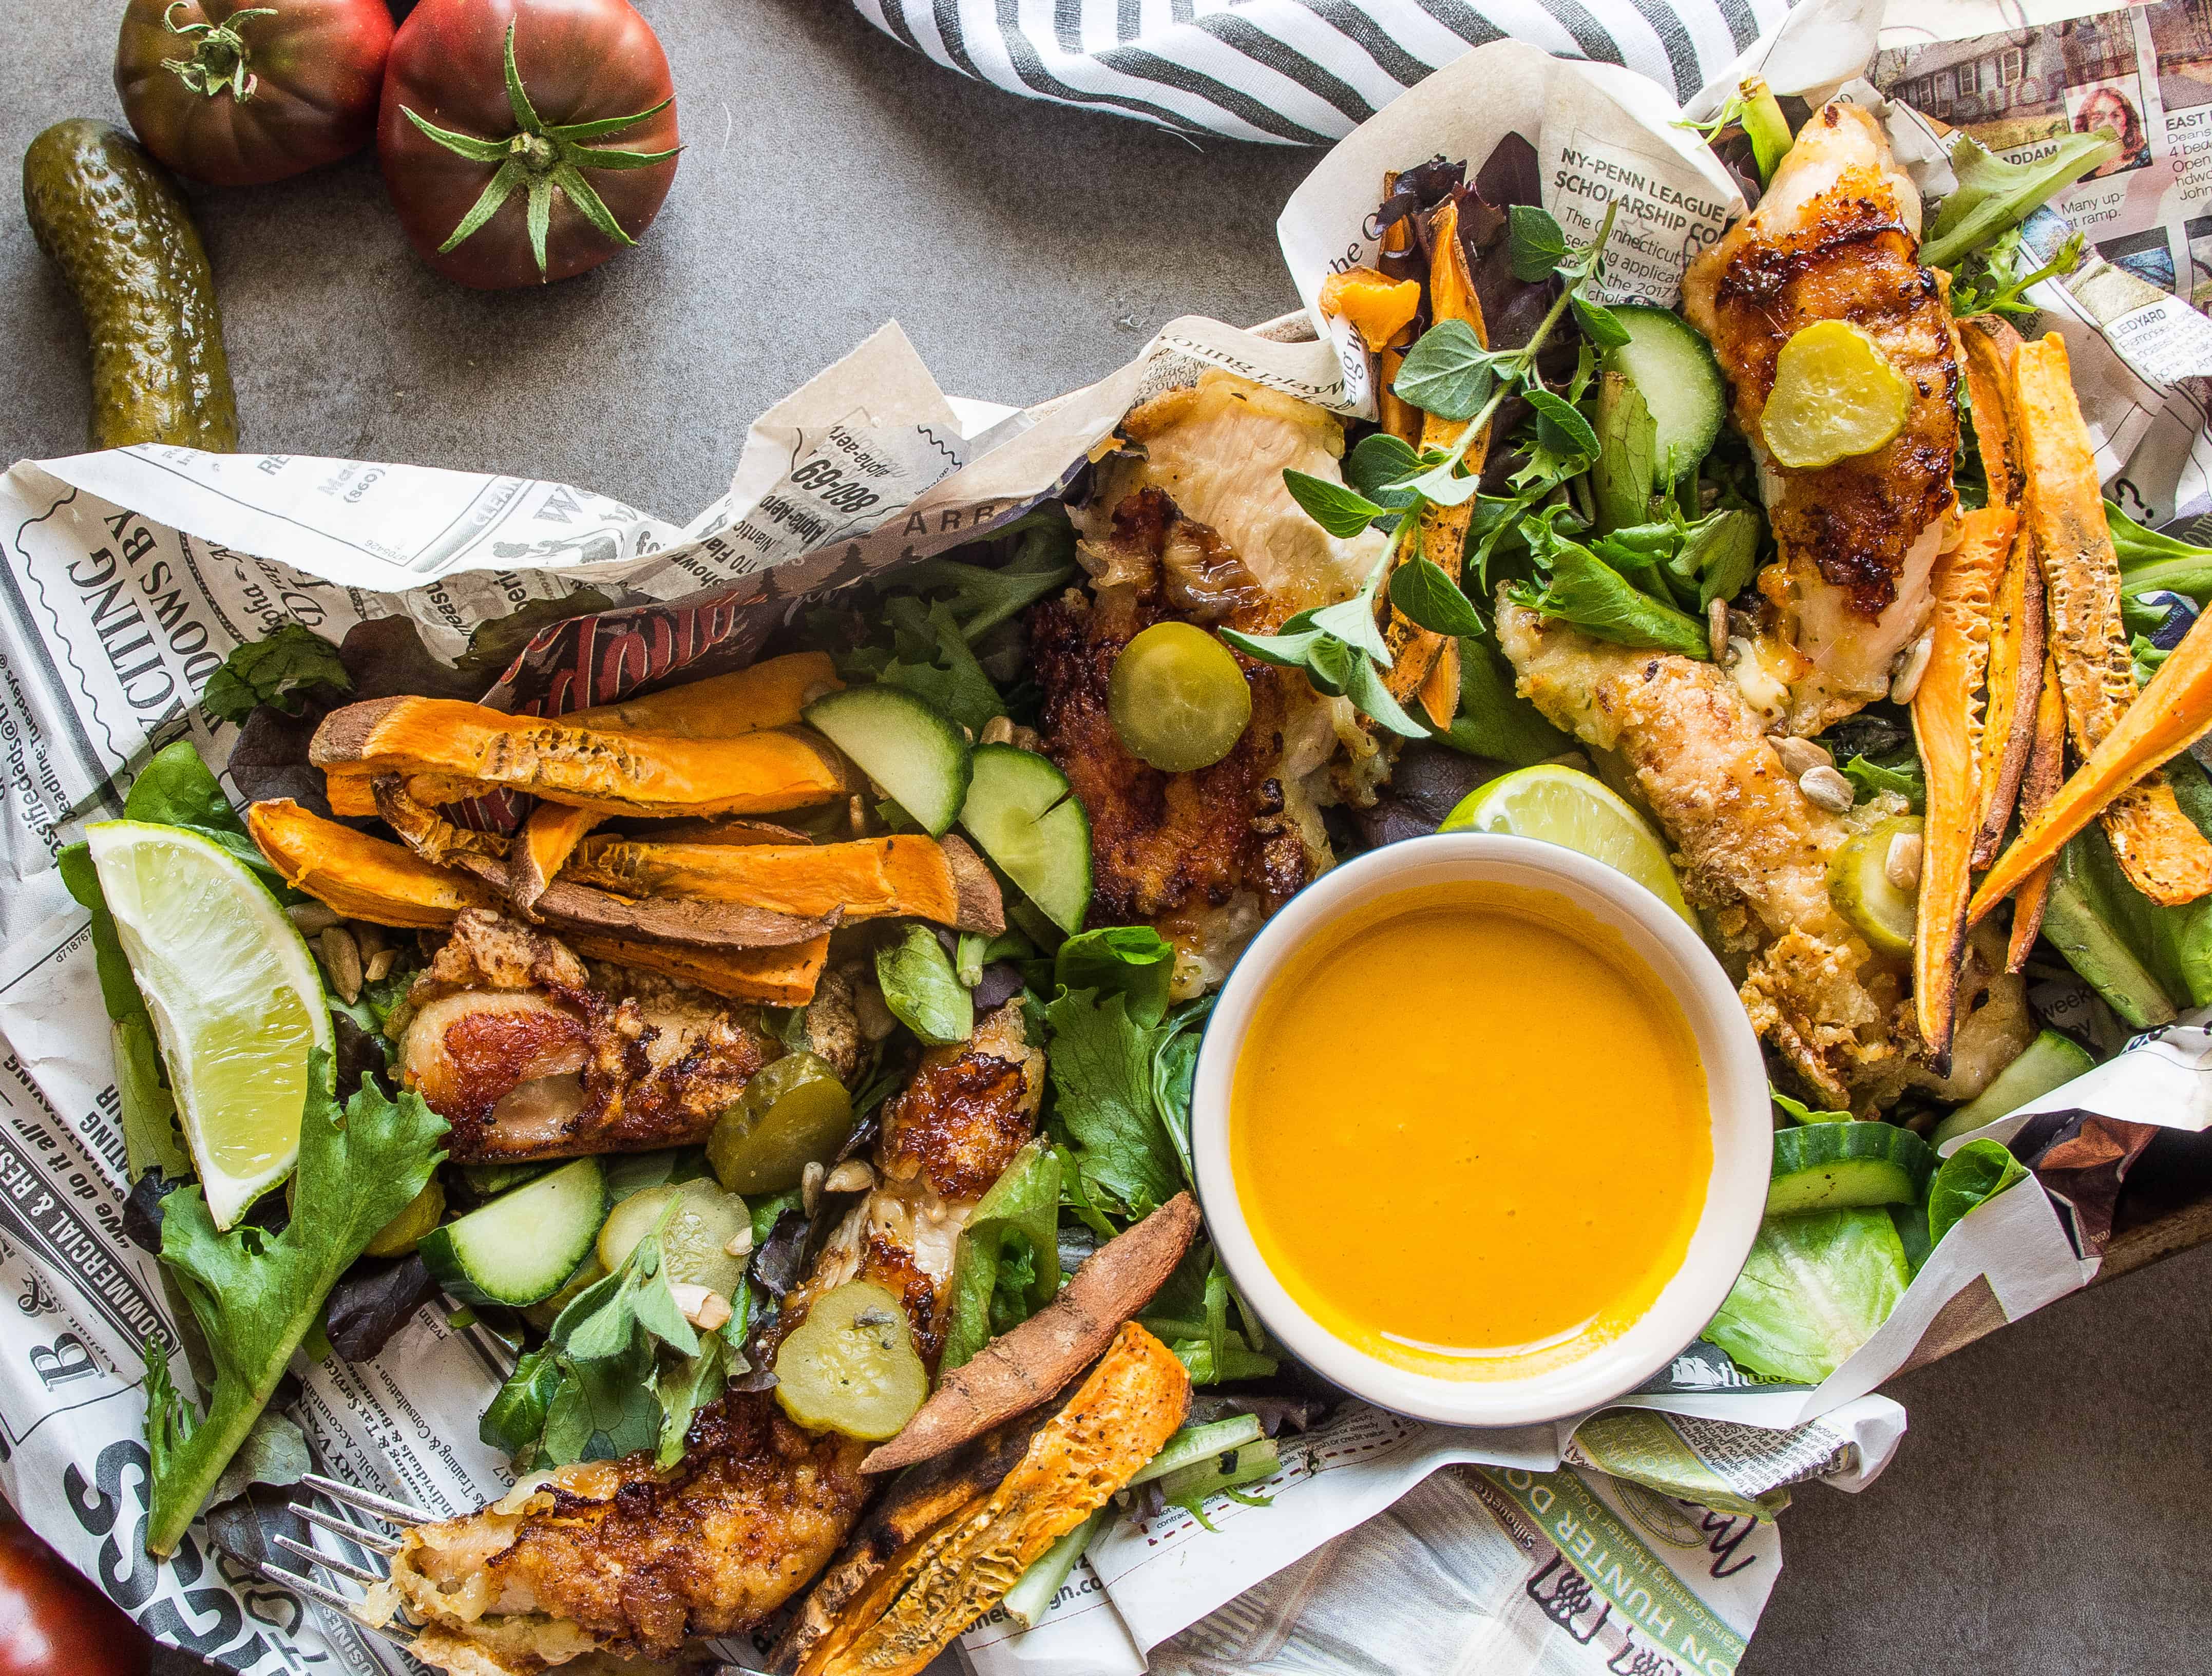 Whole30 Nashville Chicken Salad- summer southern comfort food at it's finest with a hot dressing that is gluten free, dairy free, and perfect for weekend BBQs|thekitcheneer.com